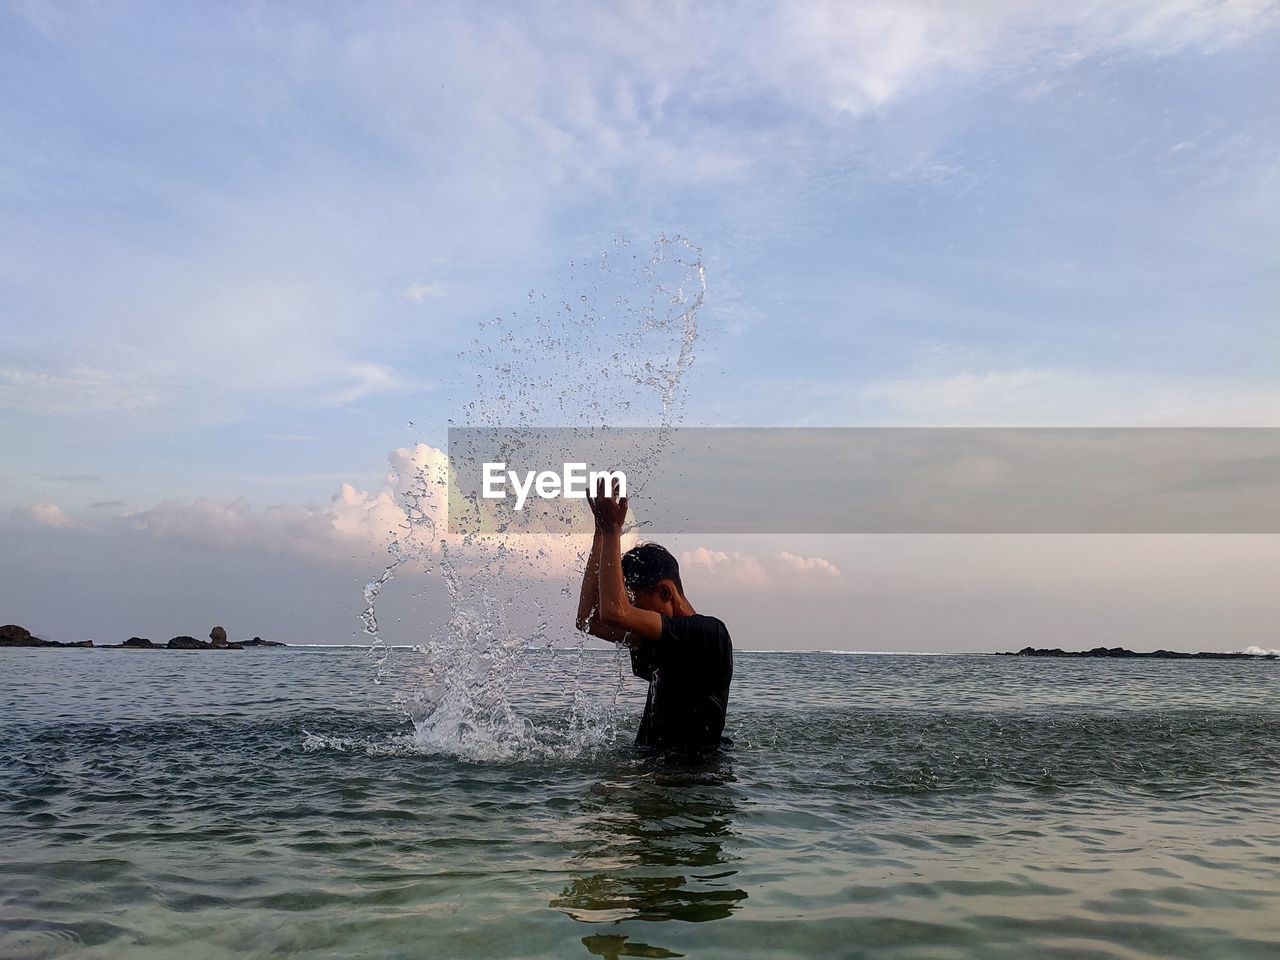 water, sky, sea, one person, nature, ocean, cloud, holiday, splashing, shore, wave, adult, beach, vacation, trip, leisure activity, motion, men, beauty in nature, lifestyles, outdoors, swimming, day, horizon over water, enjoyment, arm, land, fun, child, sports, happiness, horizon, coast, childhood, wind wave, summer, limb, arms raised, standing, emotion, blue, scenics - nature, person, three quarter length